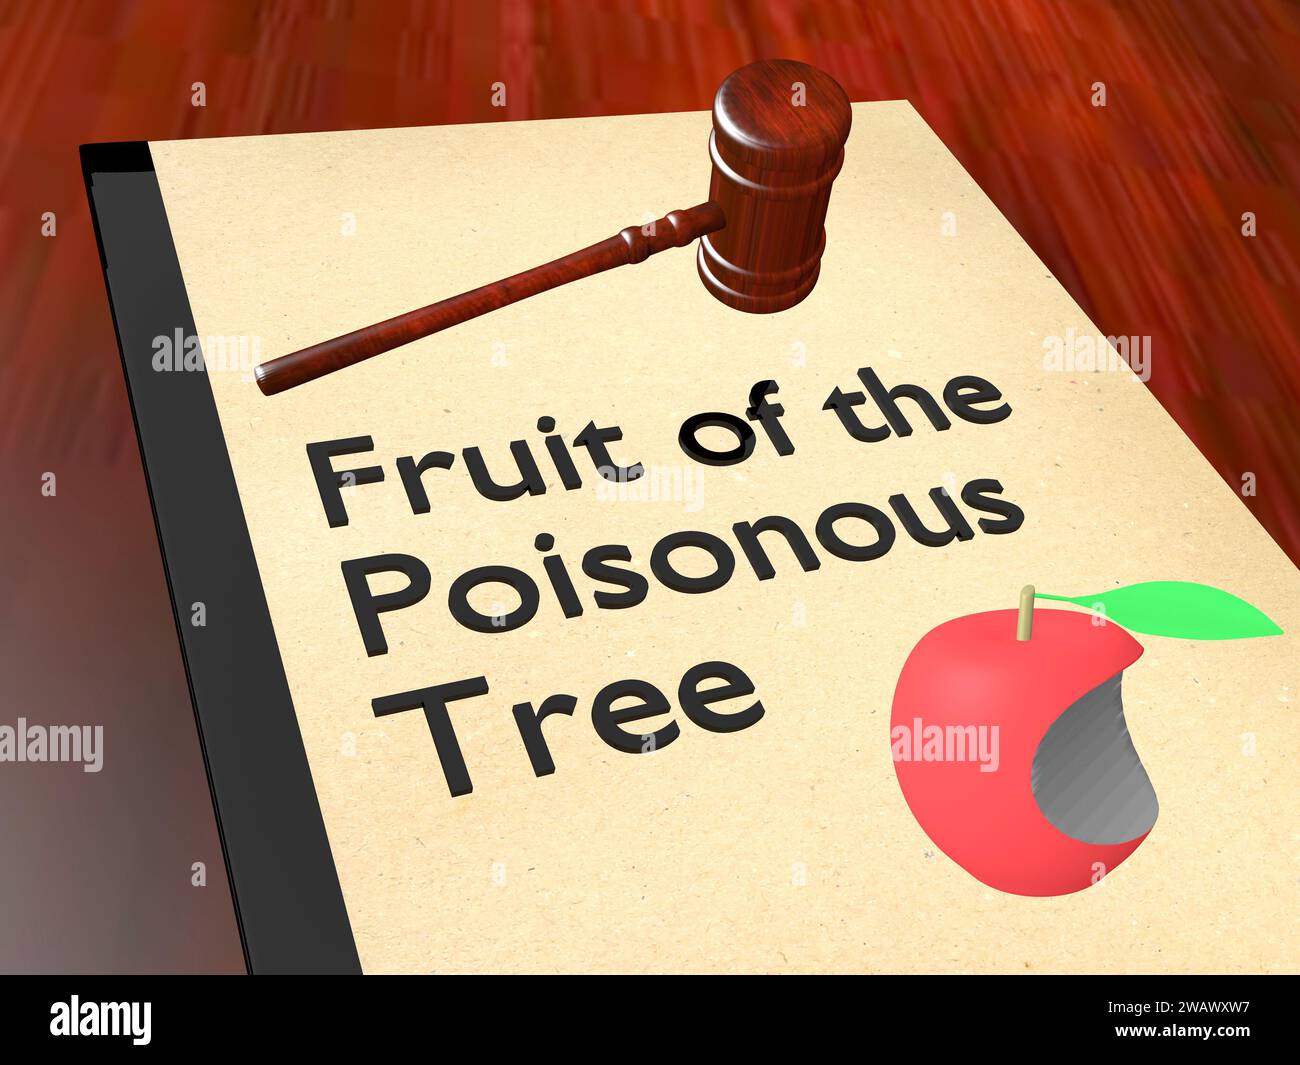 3D illustration of a legal gavel and a bitten apple on legal booklet, titled as Fruit of the Poisonous Tree. Stock Photo